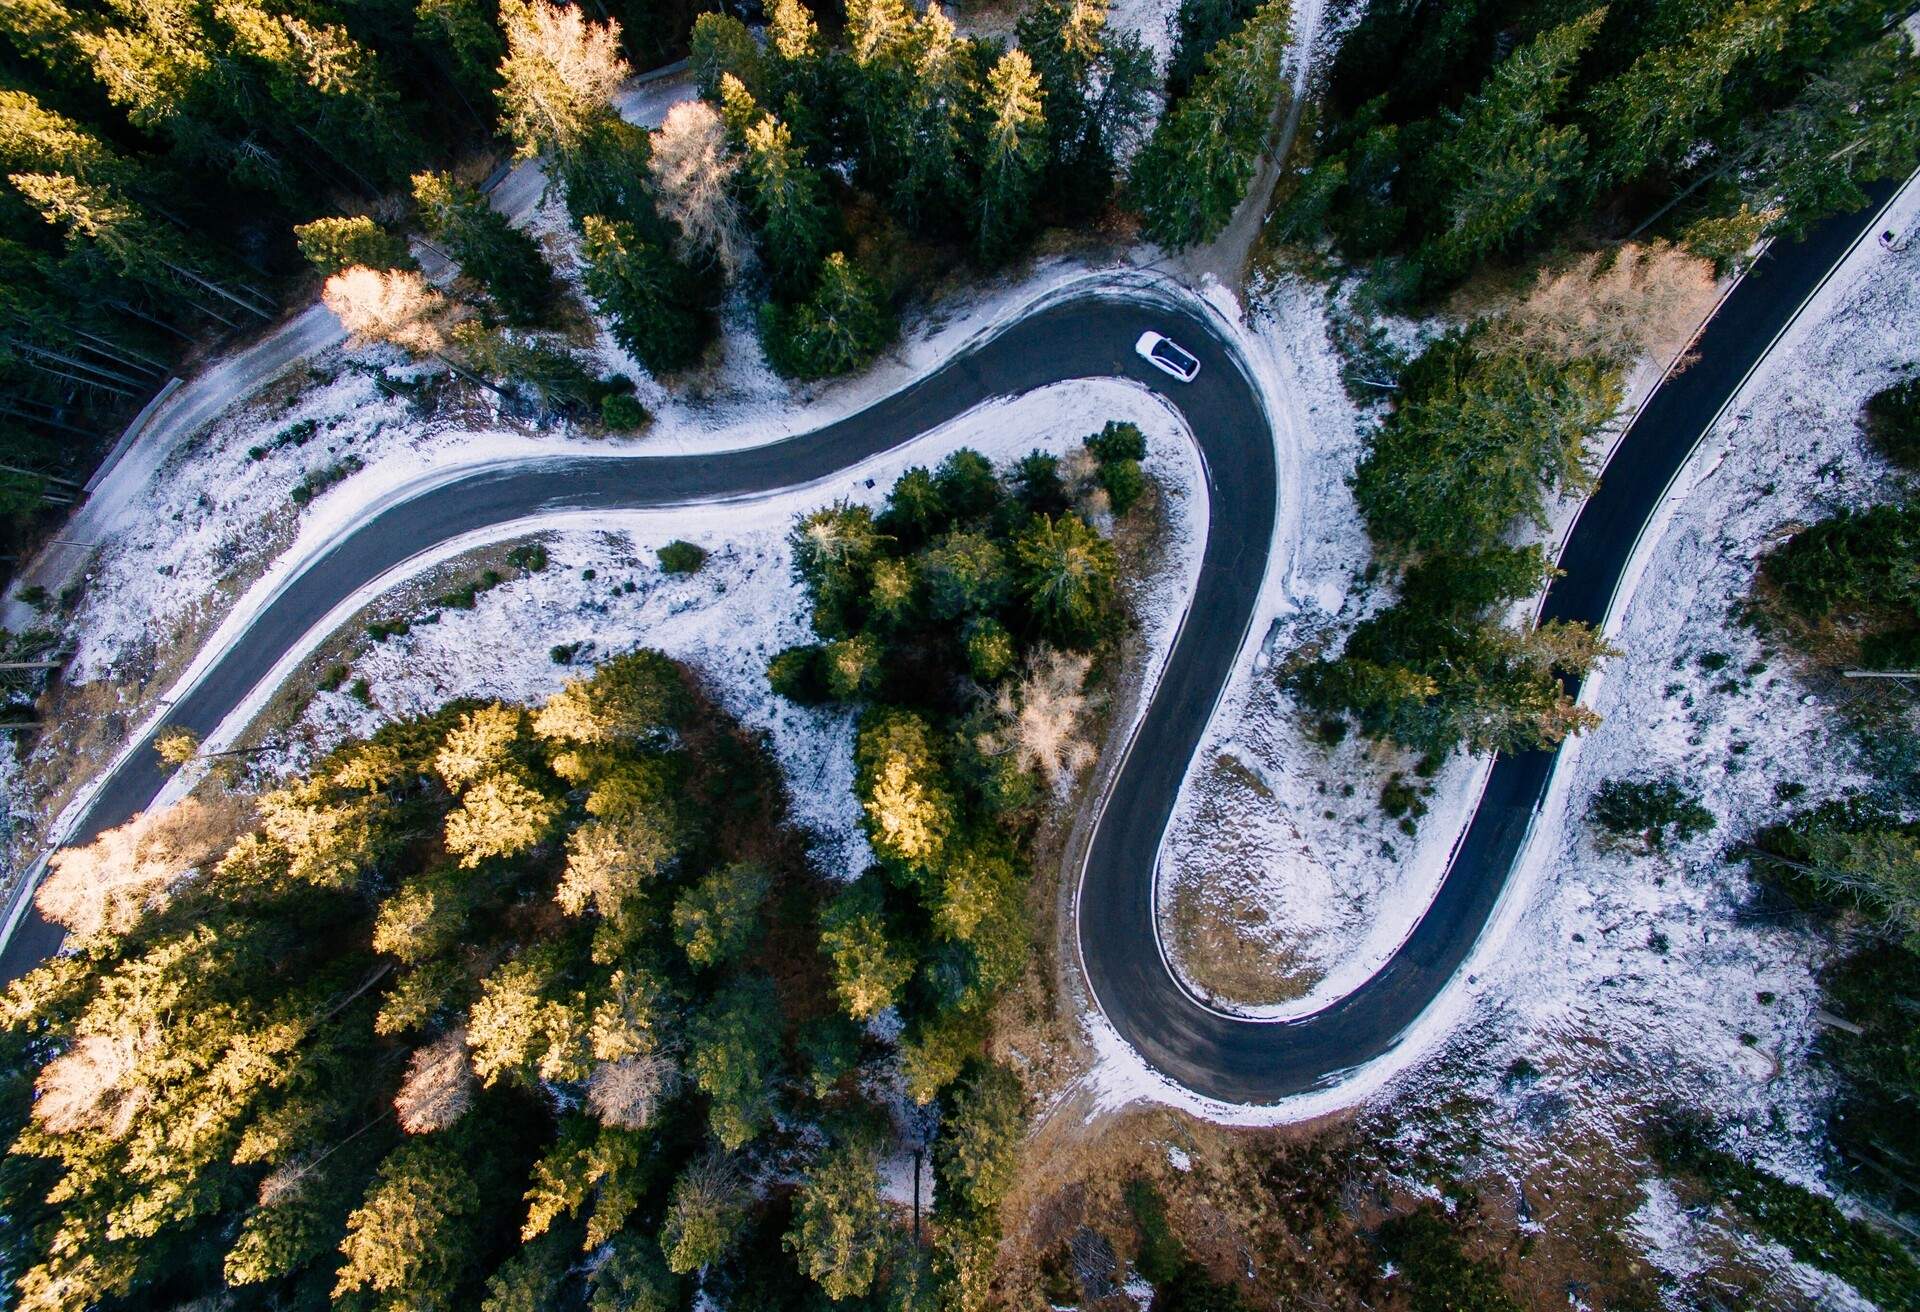 A white car pass through a winding road surrounded by tall trees during winter.